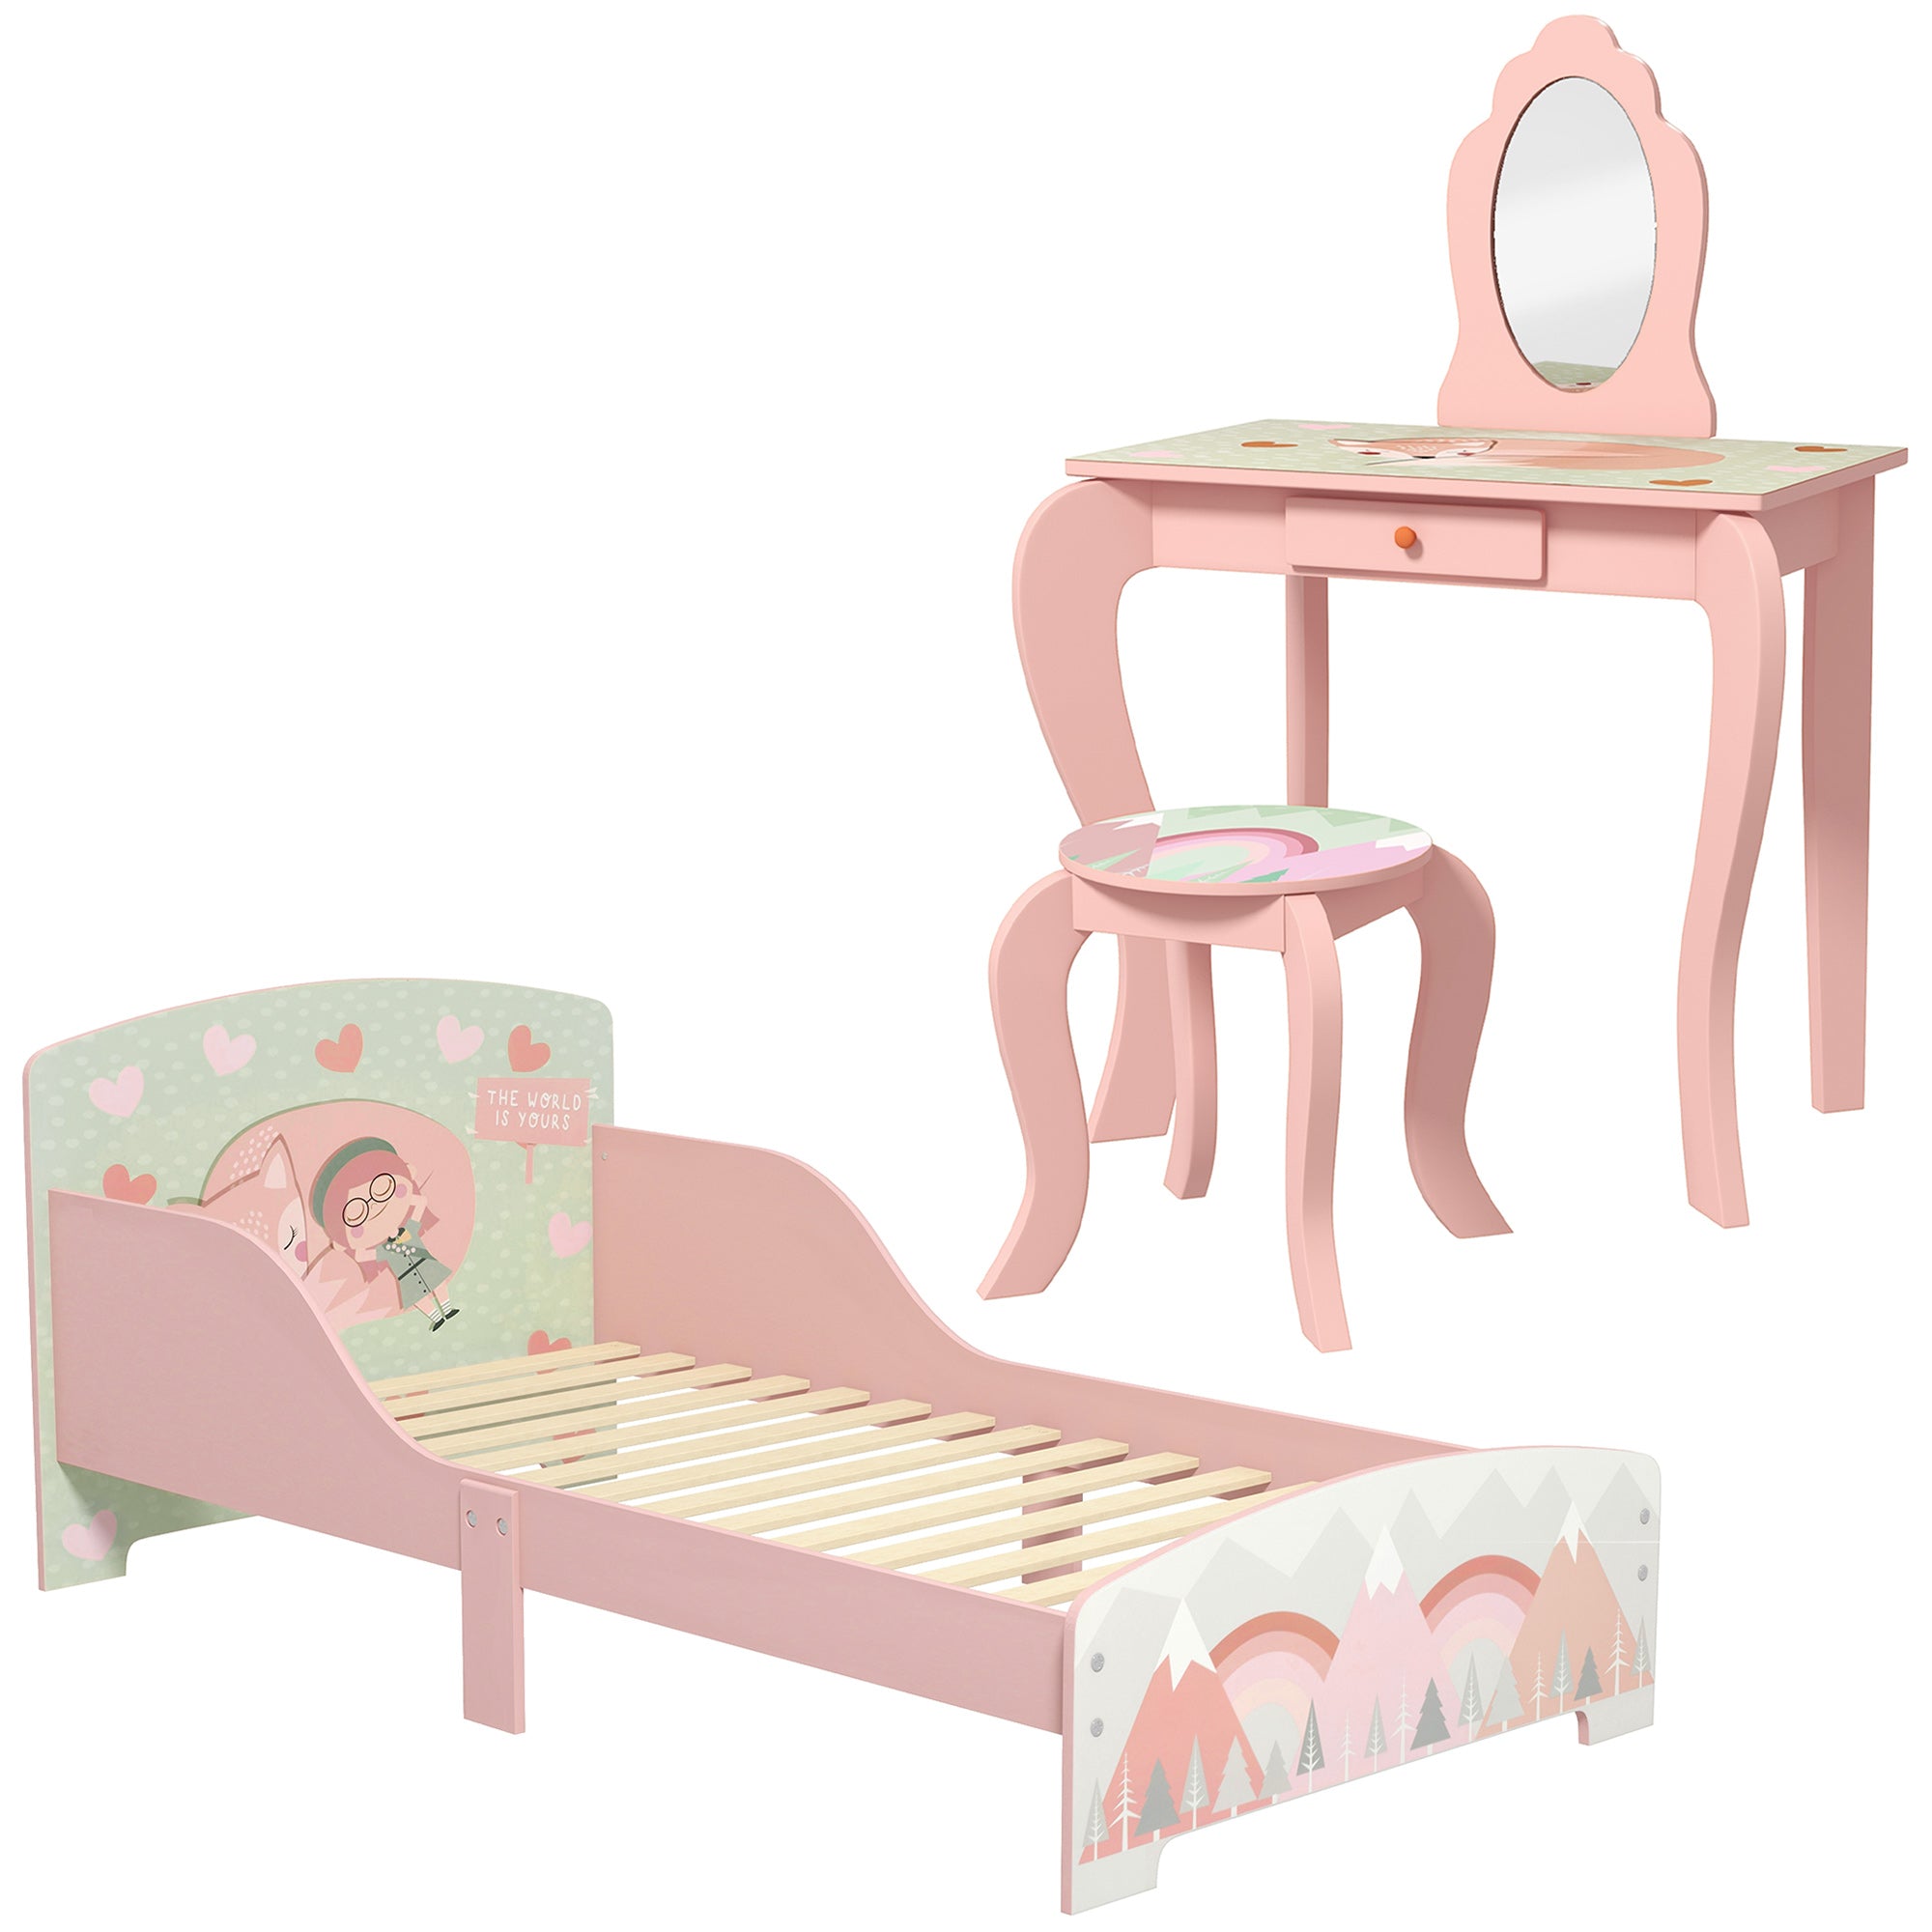 Toddler Bed Frame, Kids Dressing Table with Mirror and Stool, Cute Animal Design Kids Bedroom Furniture Set for Ages 3-6 Years, Pink-0